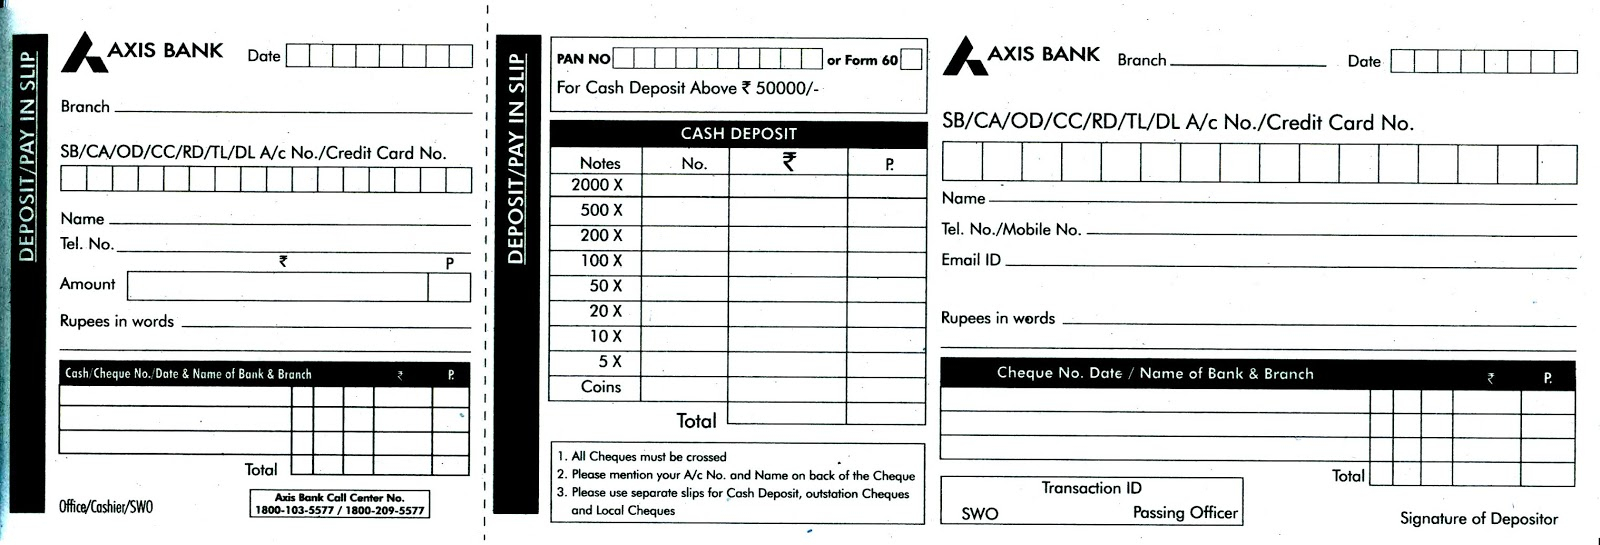 Axis Bank Deposit Form Download Everything You Need To Know About Axis